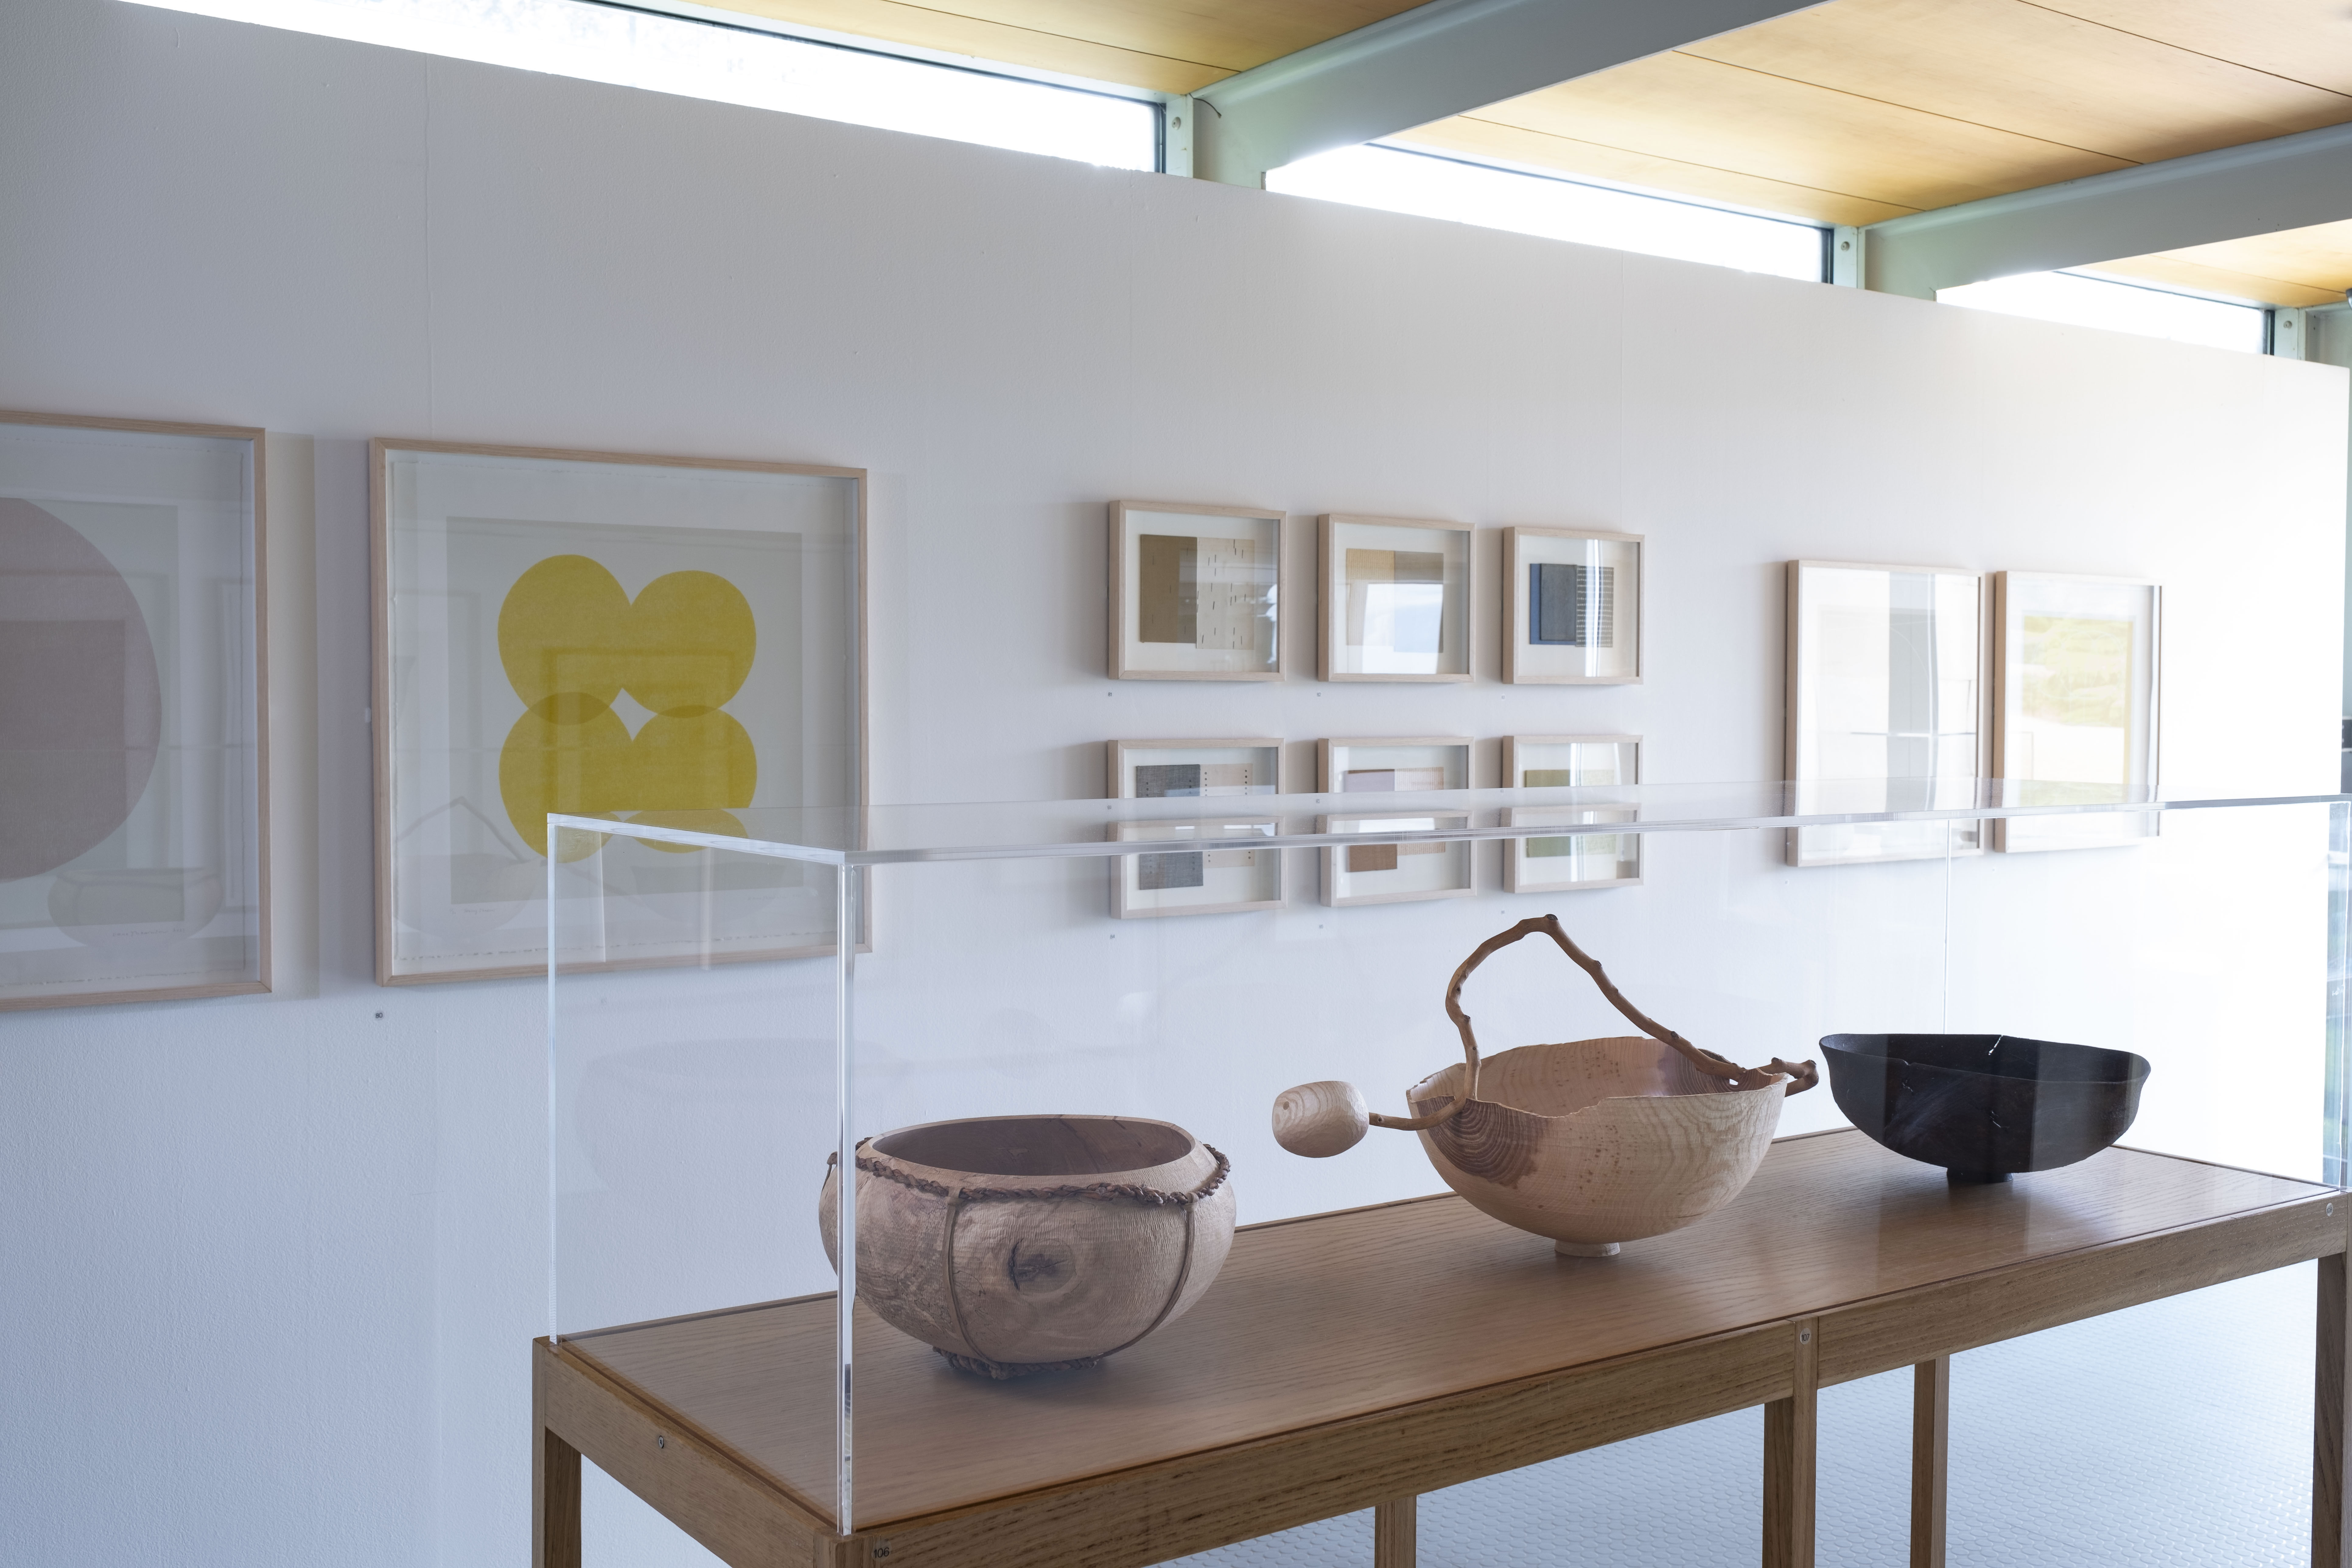 A white gallery space with framed prints on the walls and carved wooden vessels on a table in the centre